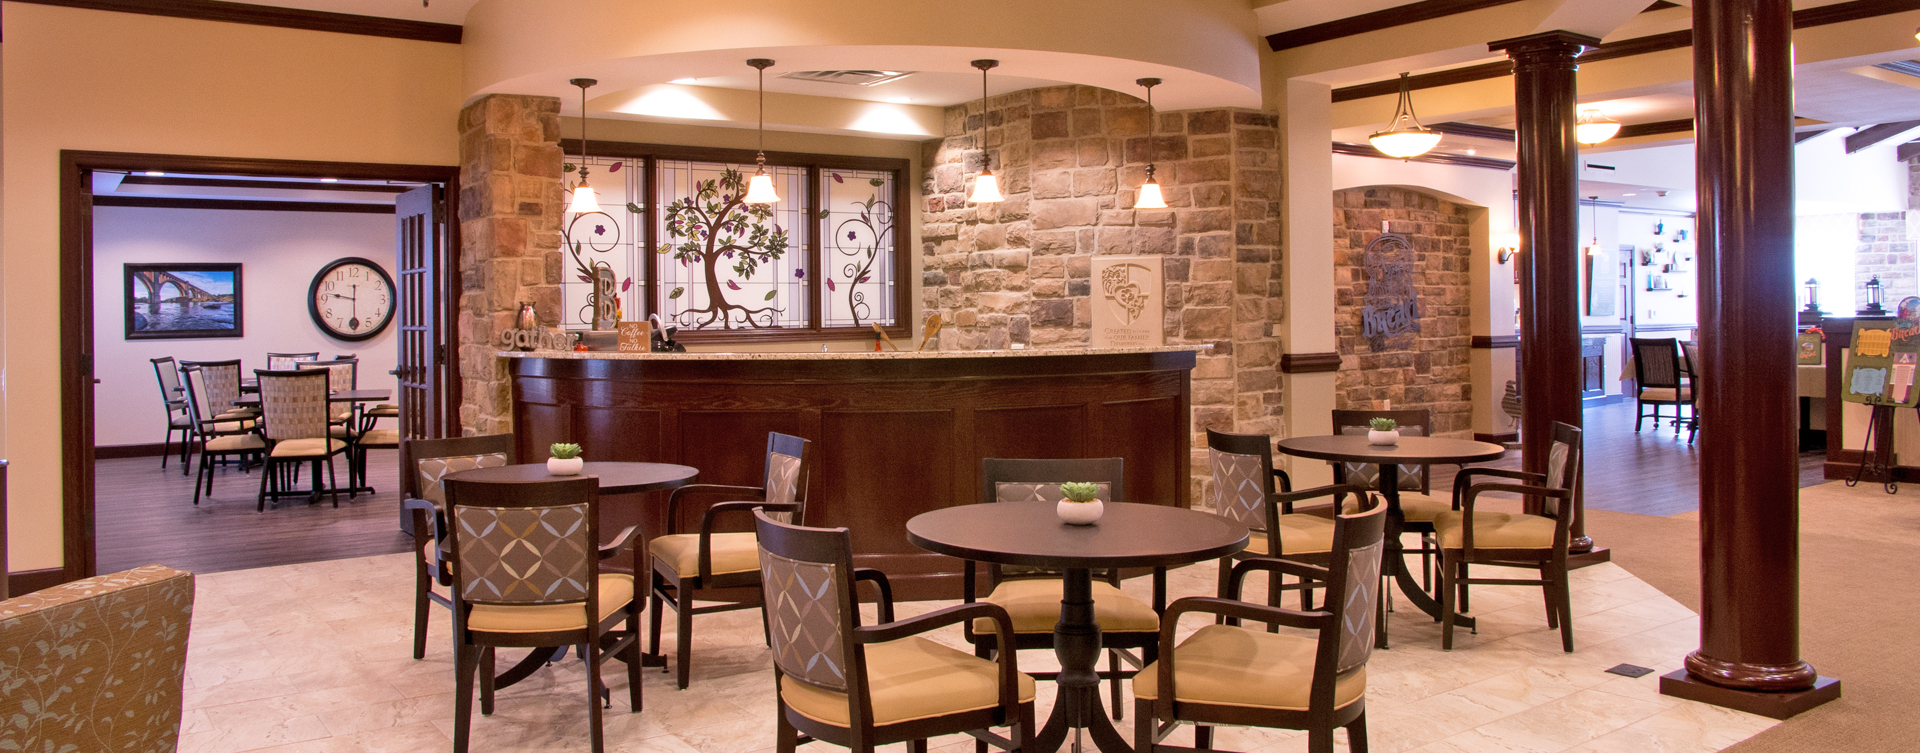 We’re serving up snacks, beverages and service around the clock in the bistro at Bickford of Chesterfield